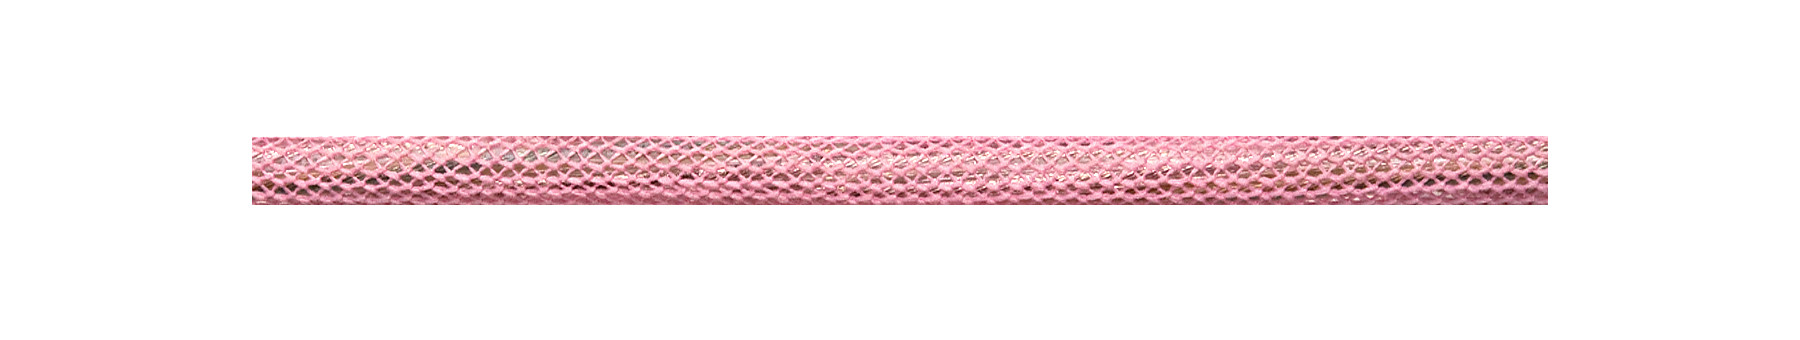 Textile Cable Pastel Pink Netlike Textile Covering